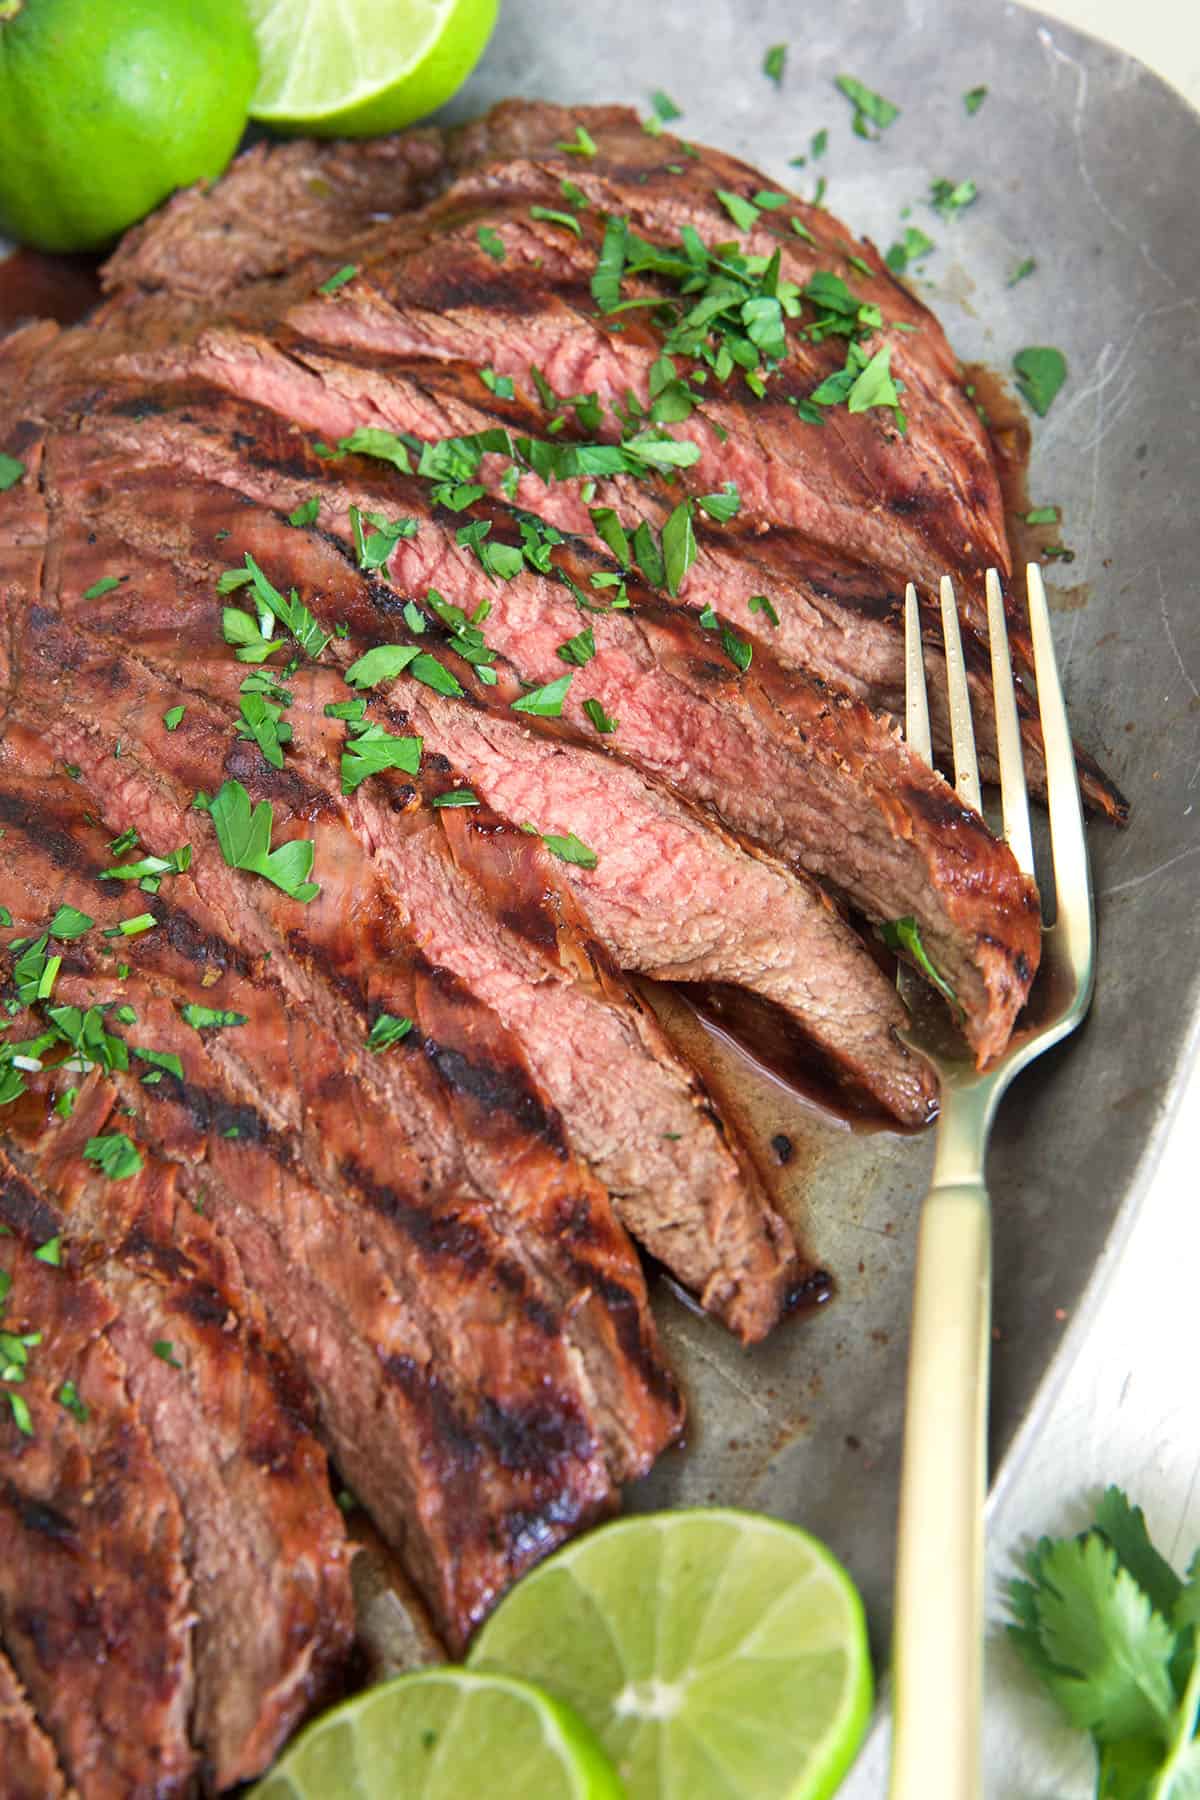 A fork is placed on a serving tray full of sliced carne asada.